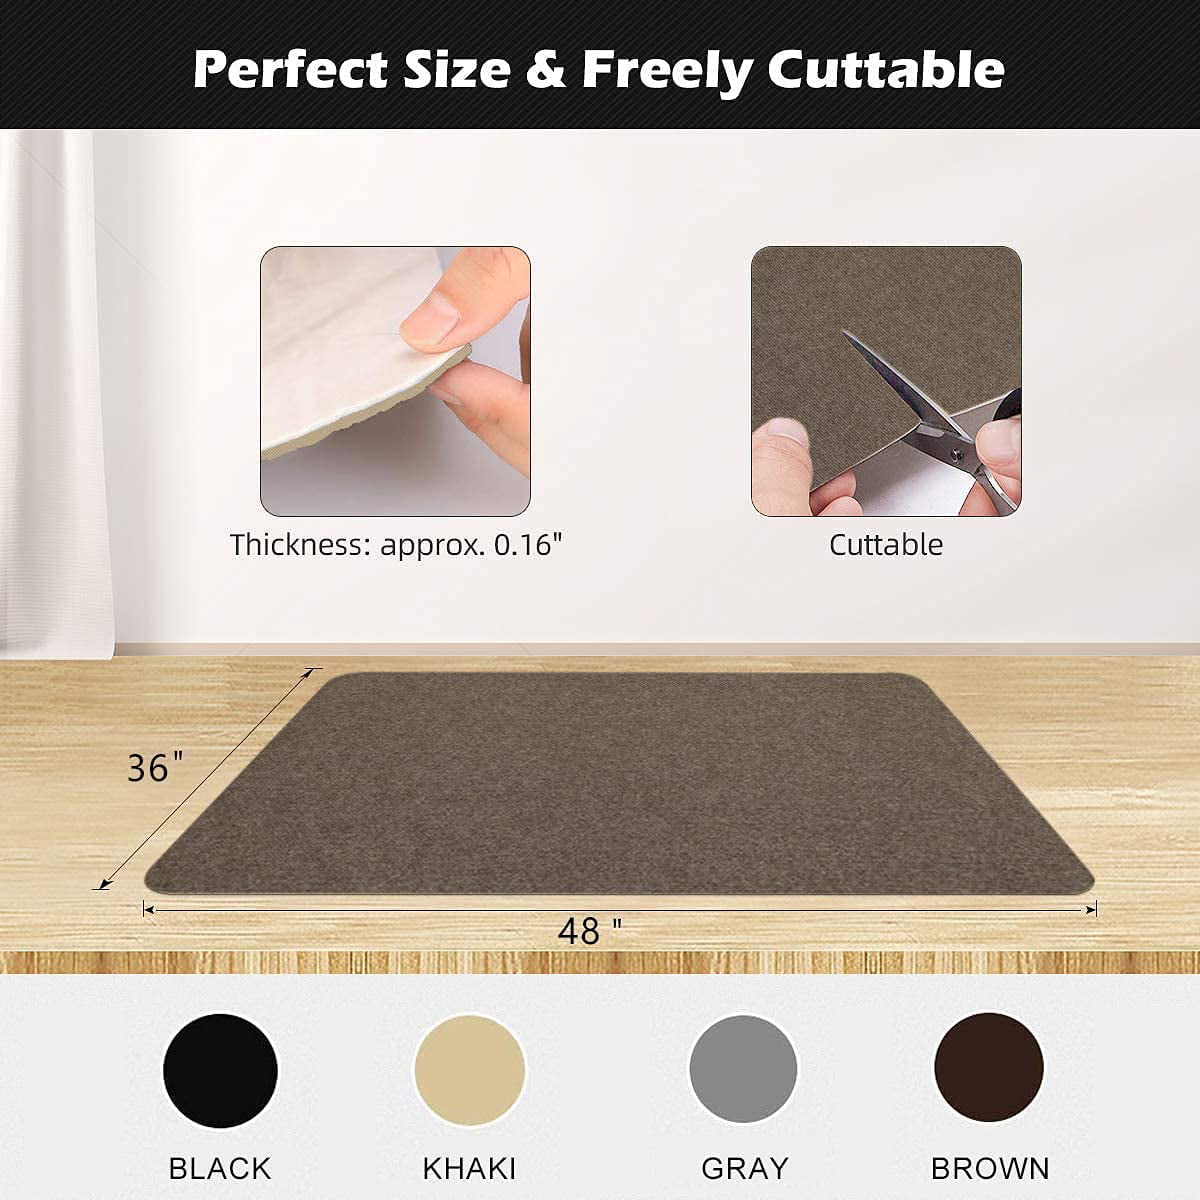 Multi-Purpose Chair Carpet for Home Dark Gray 5mm Thick 48x36 Hard Floor Protector Mat EUROTEX Office Chair Mat- Office Desk Chair Mat for Hardwood Floors 